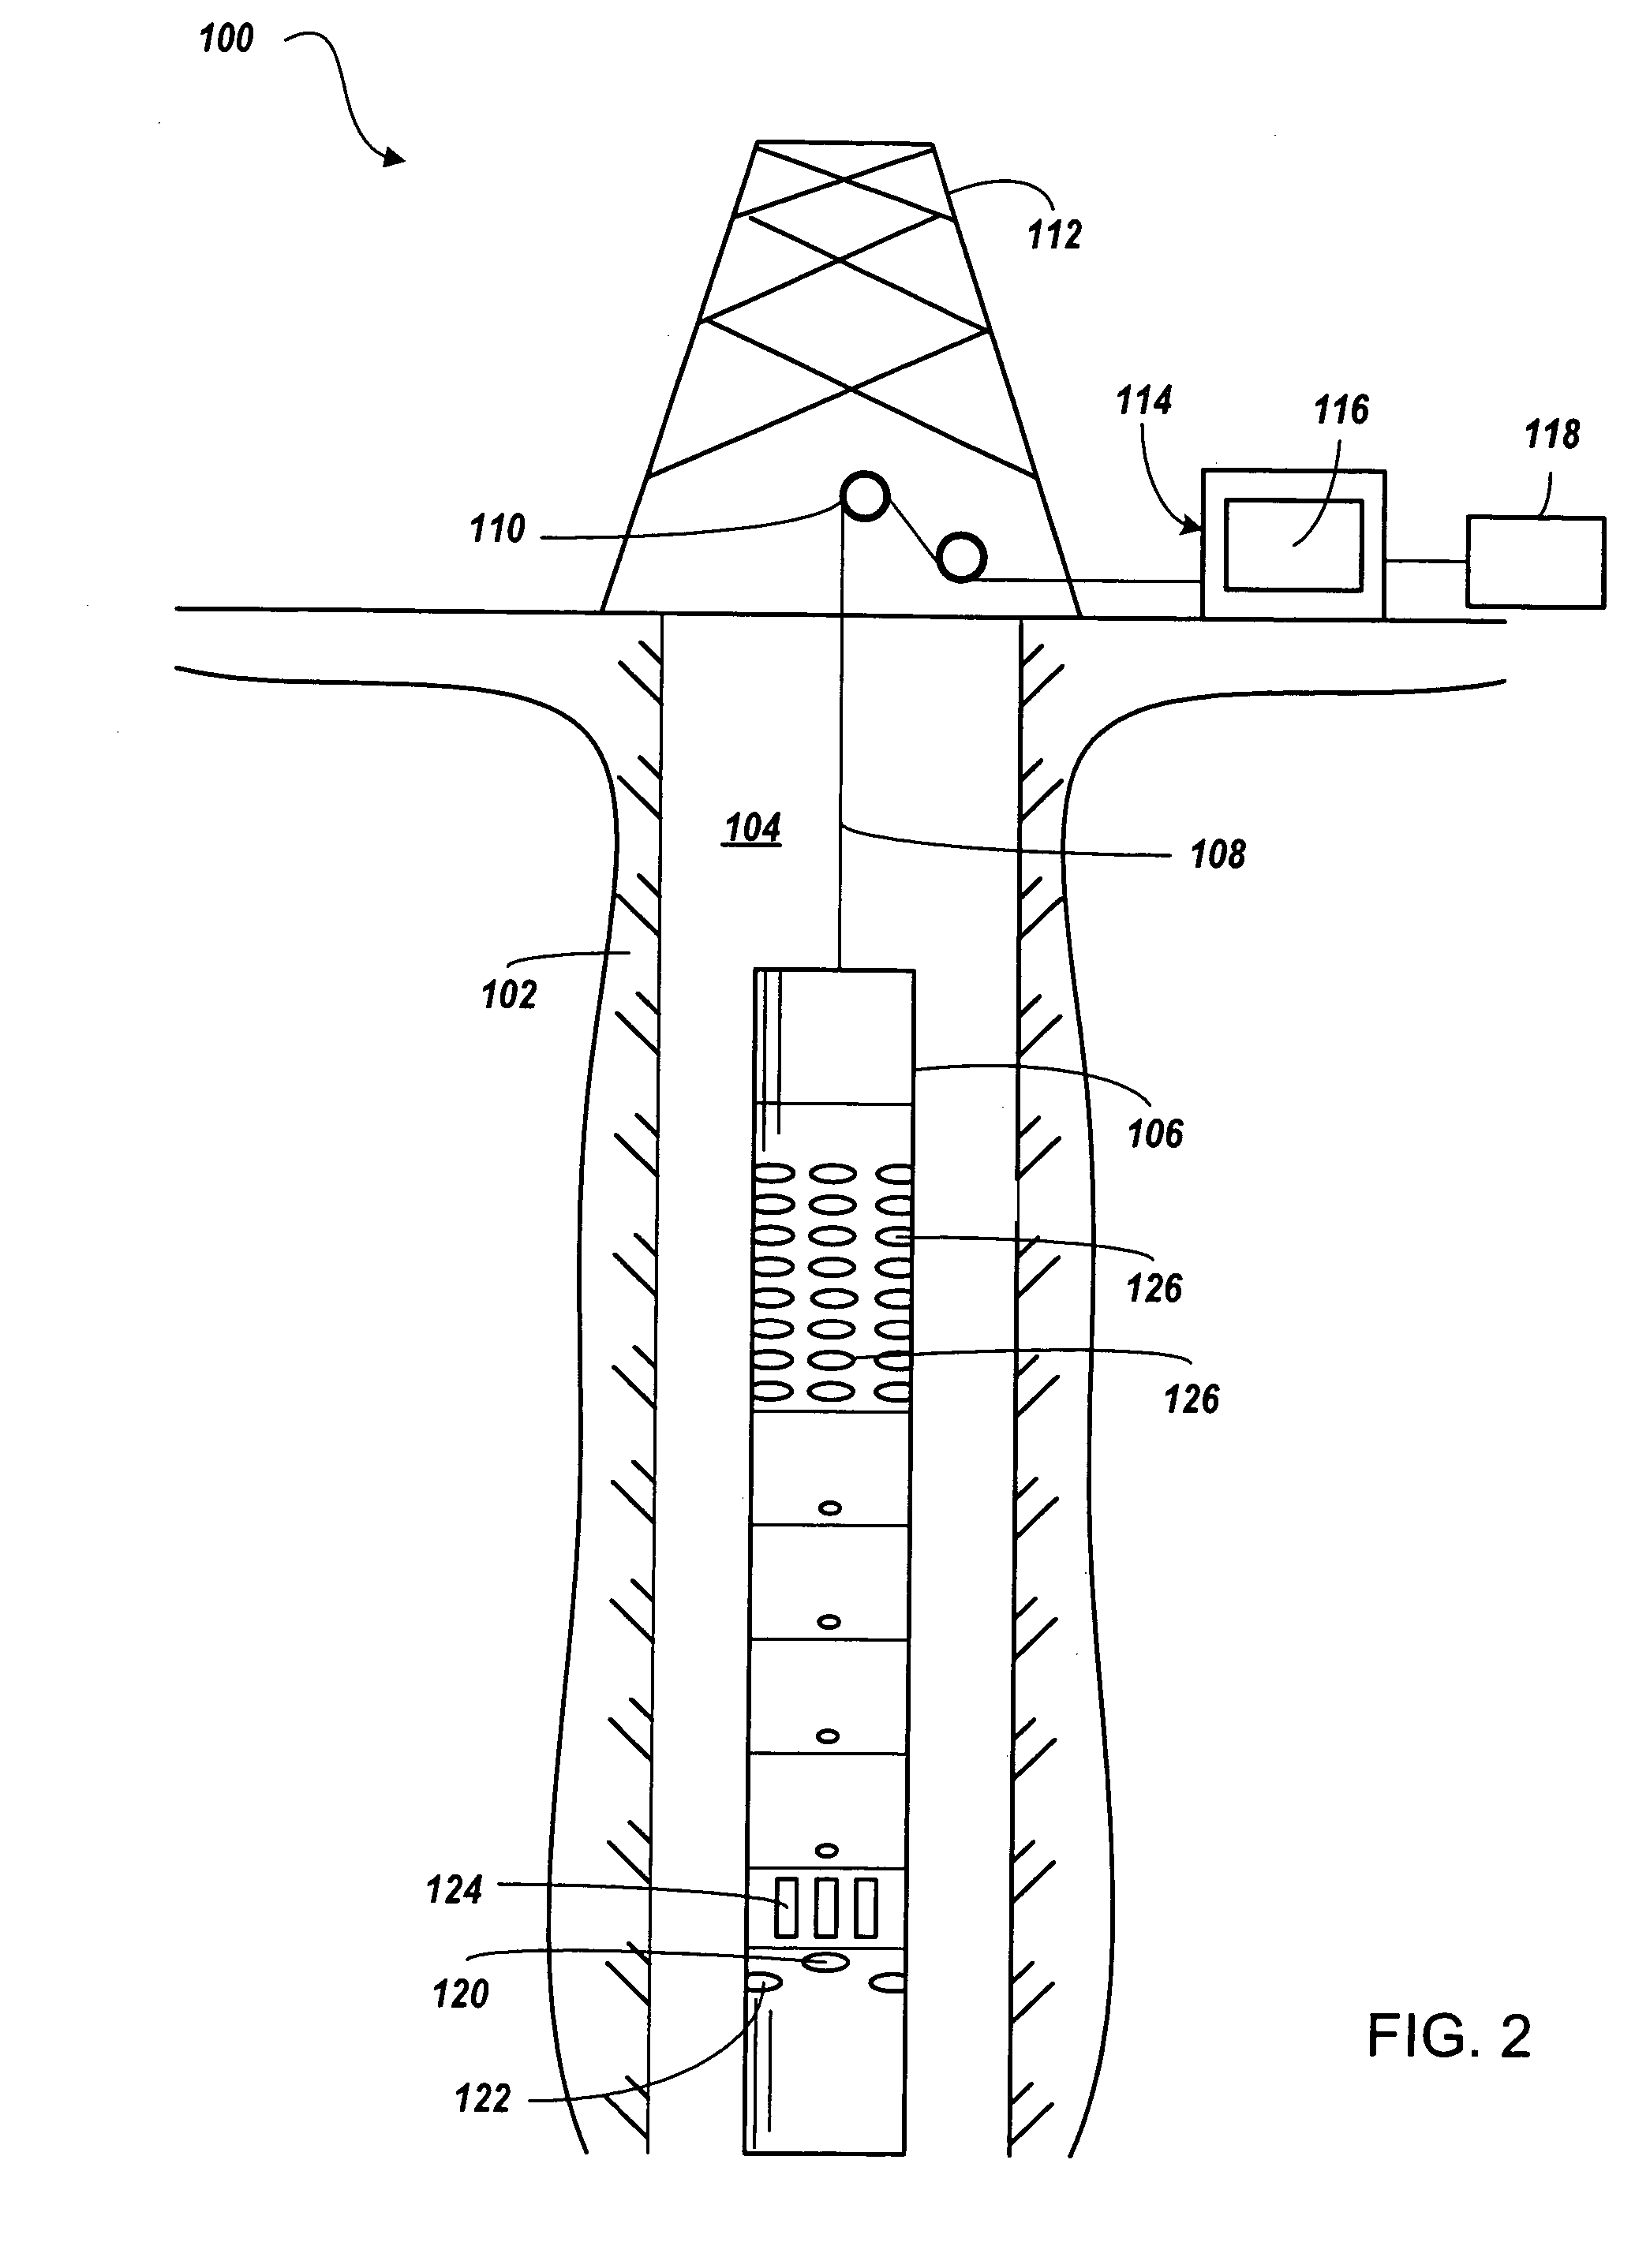 Stoneley radial profiling of formation shear slowness